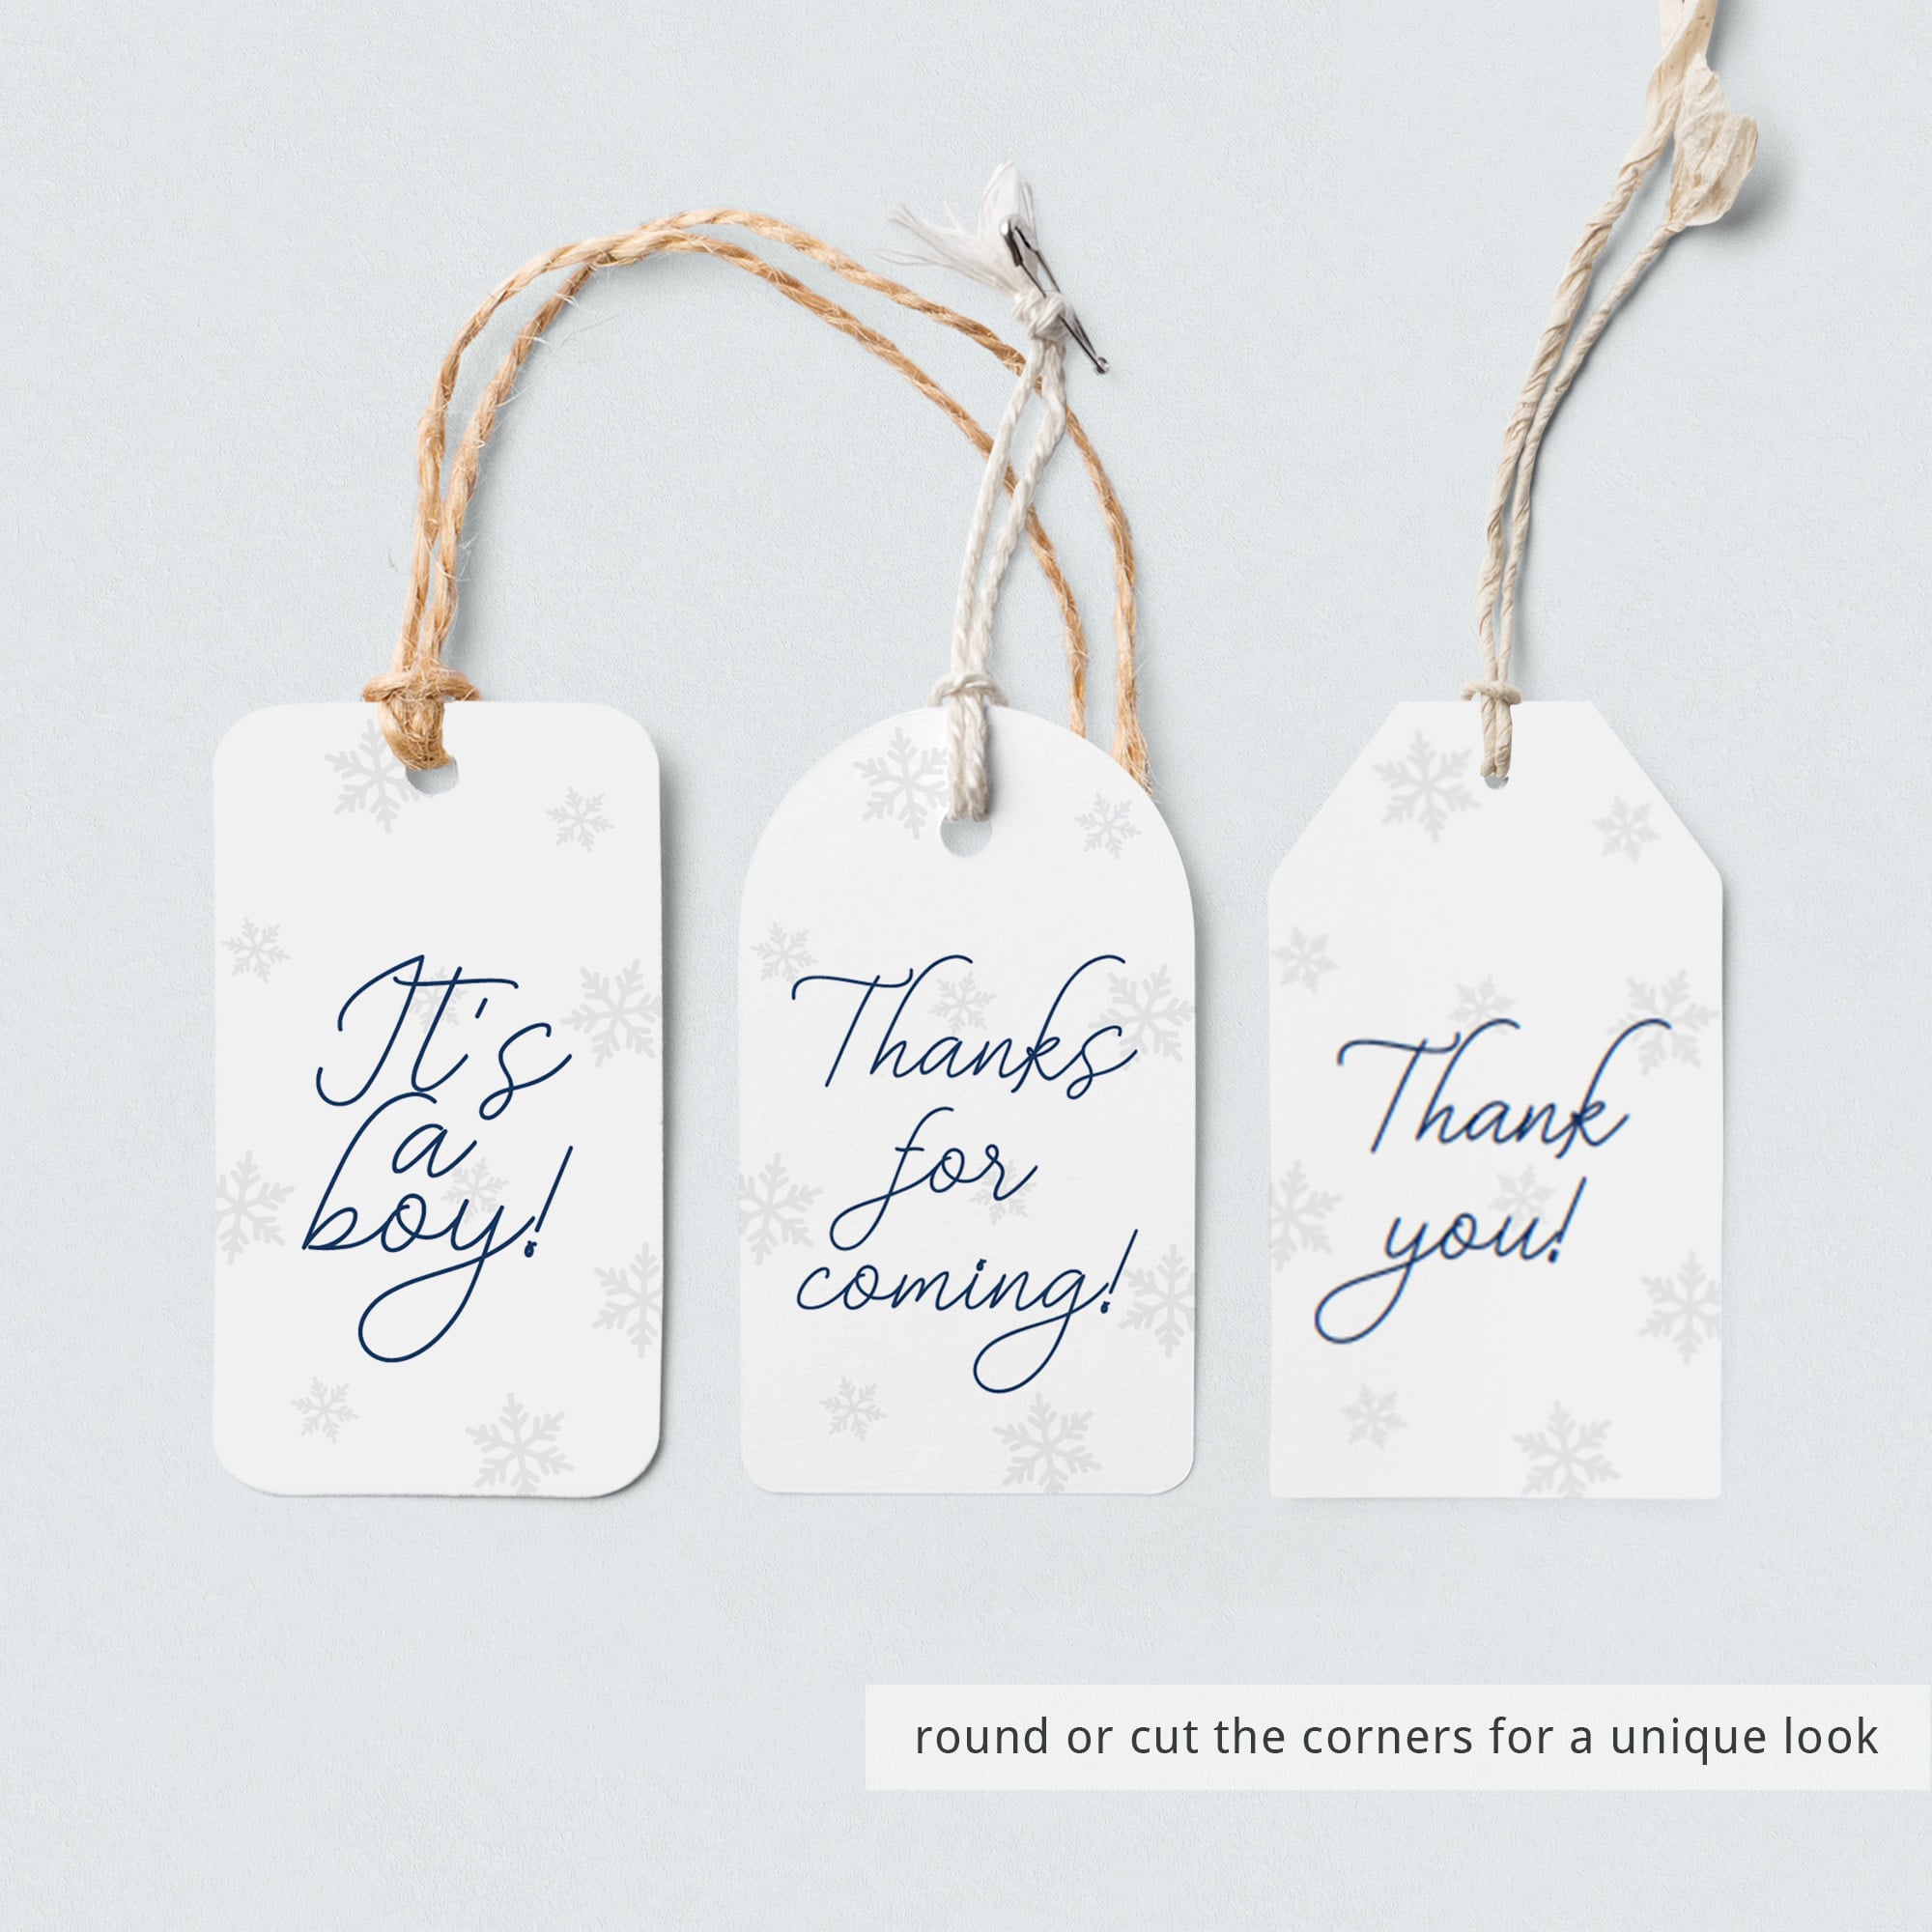 Printable tags for winter themed event instant download PDF by LittleSizzle